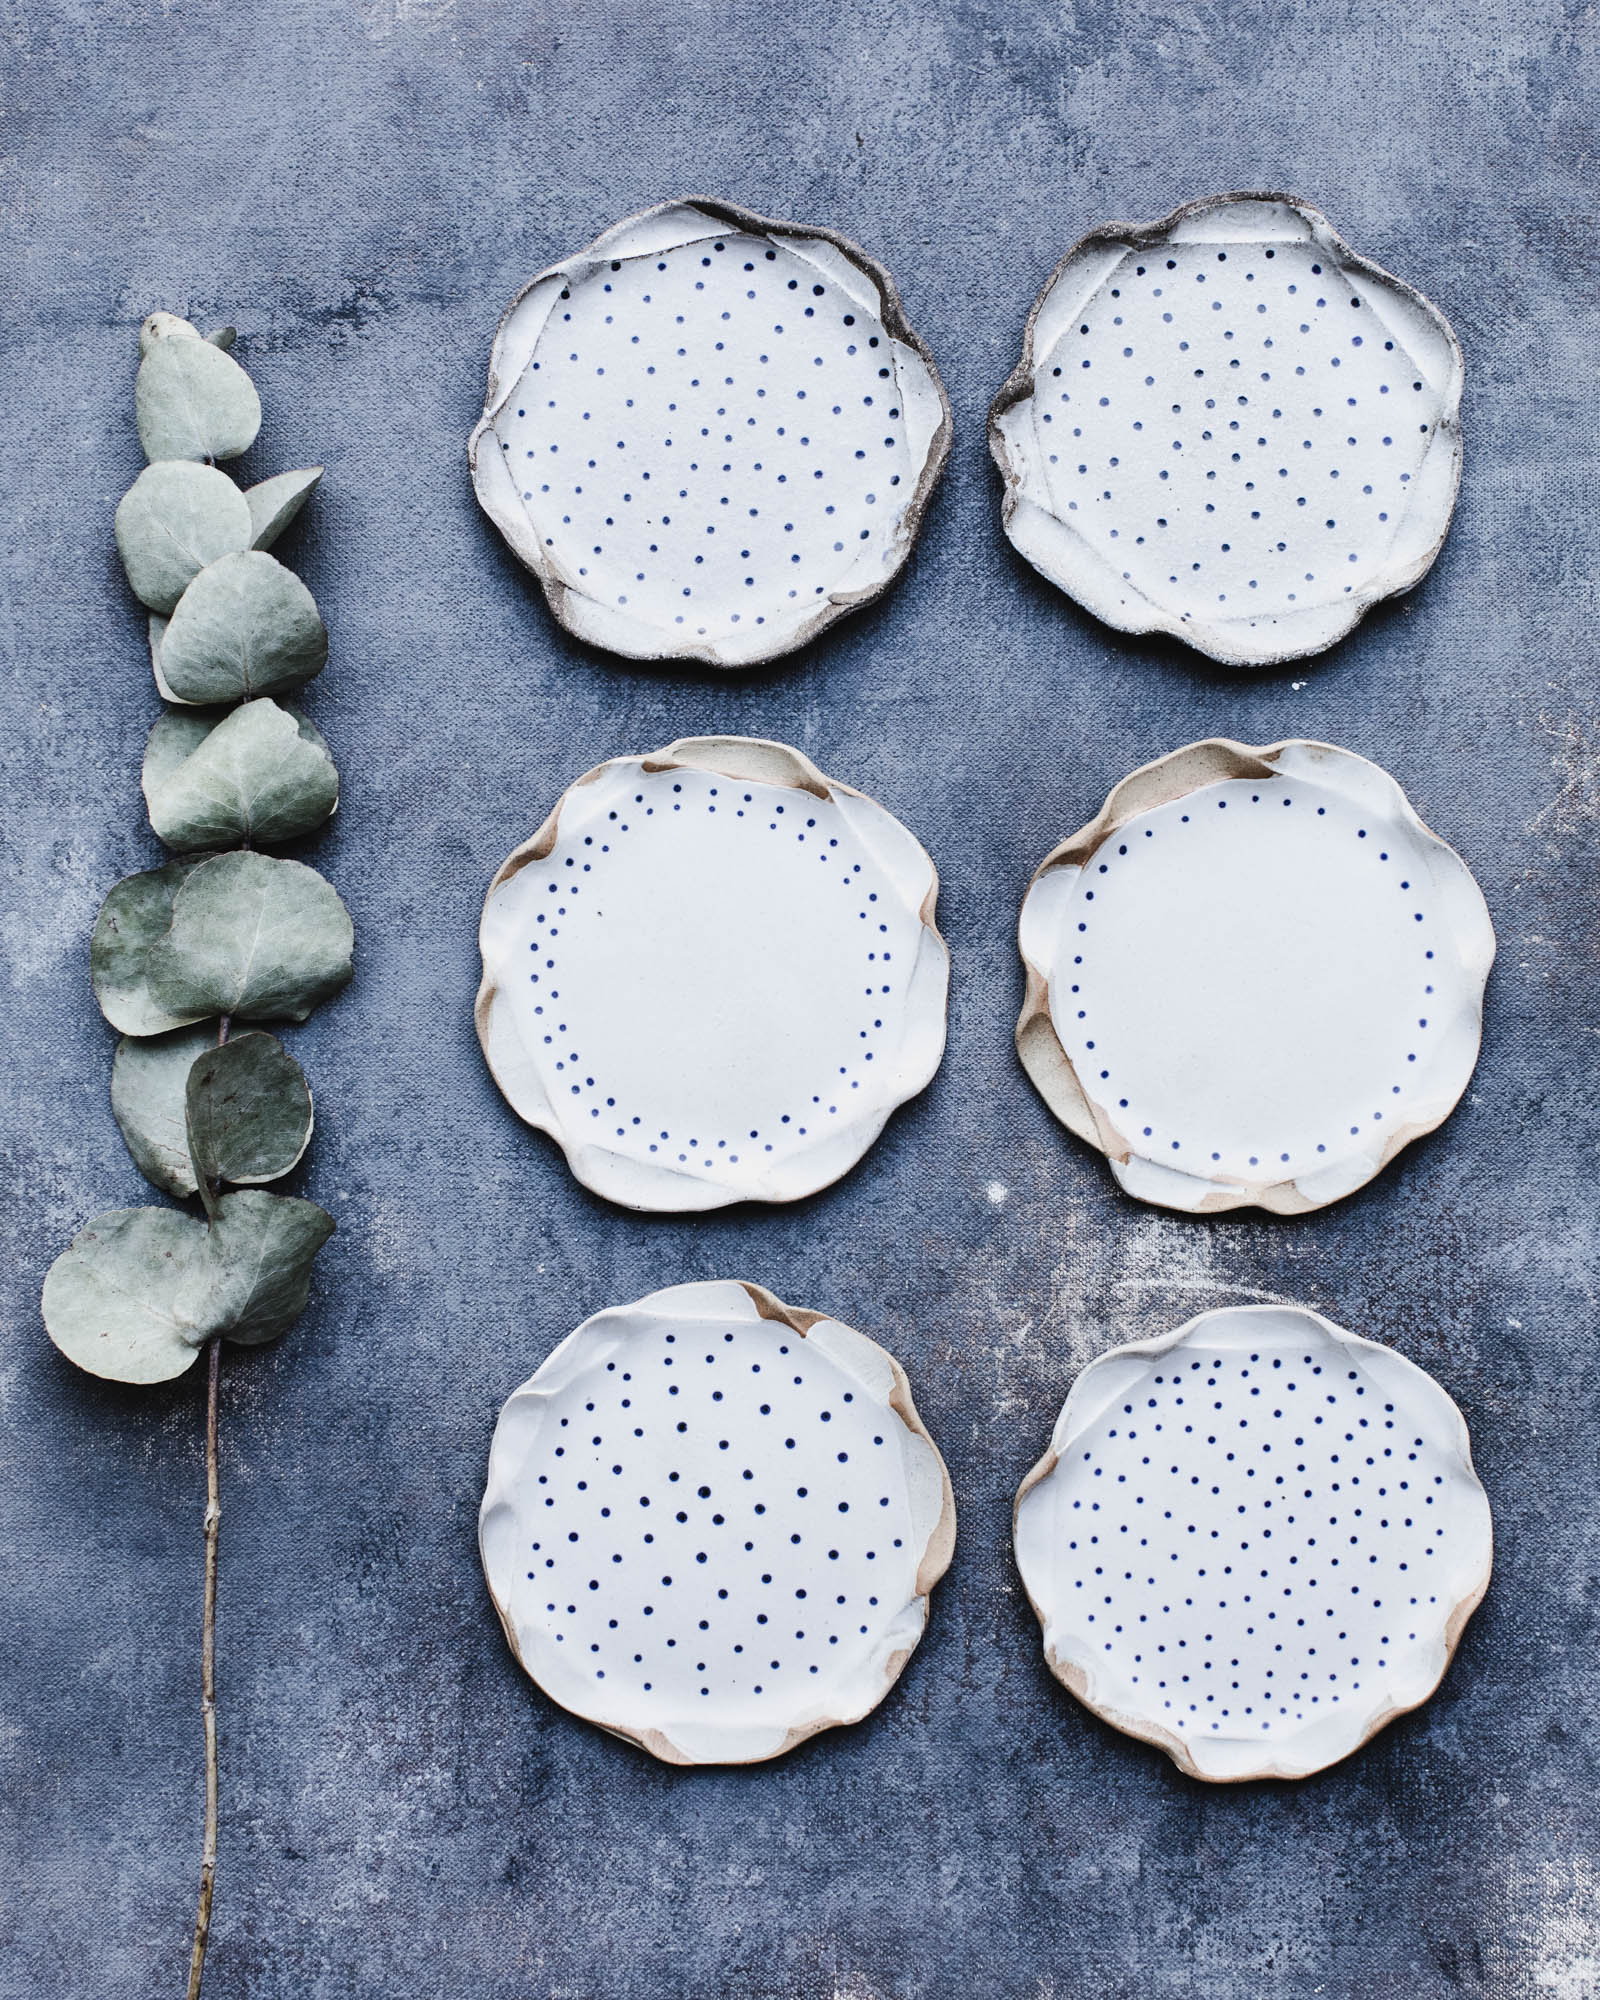 Small snack / product plates with earthy rims and freckles pattern handmade by clay beehive ceramics